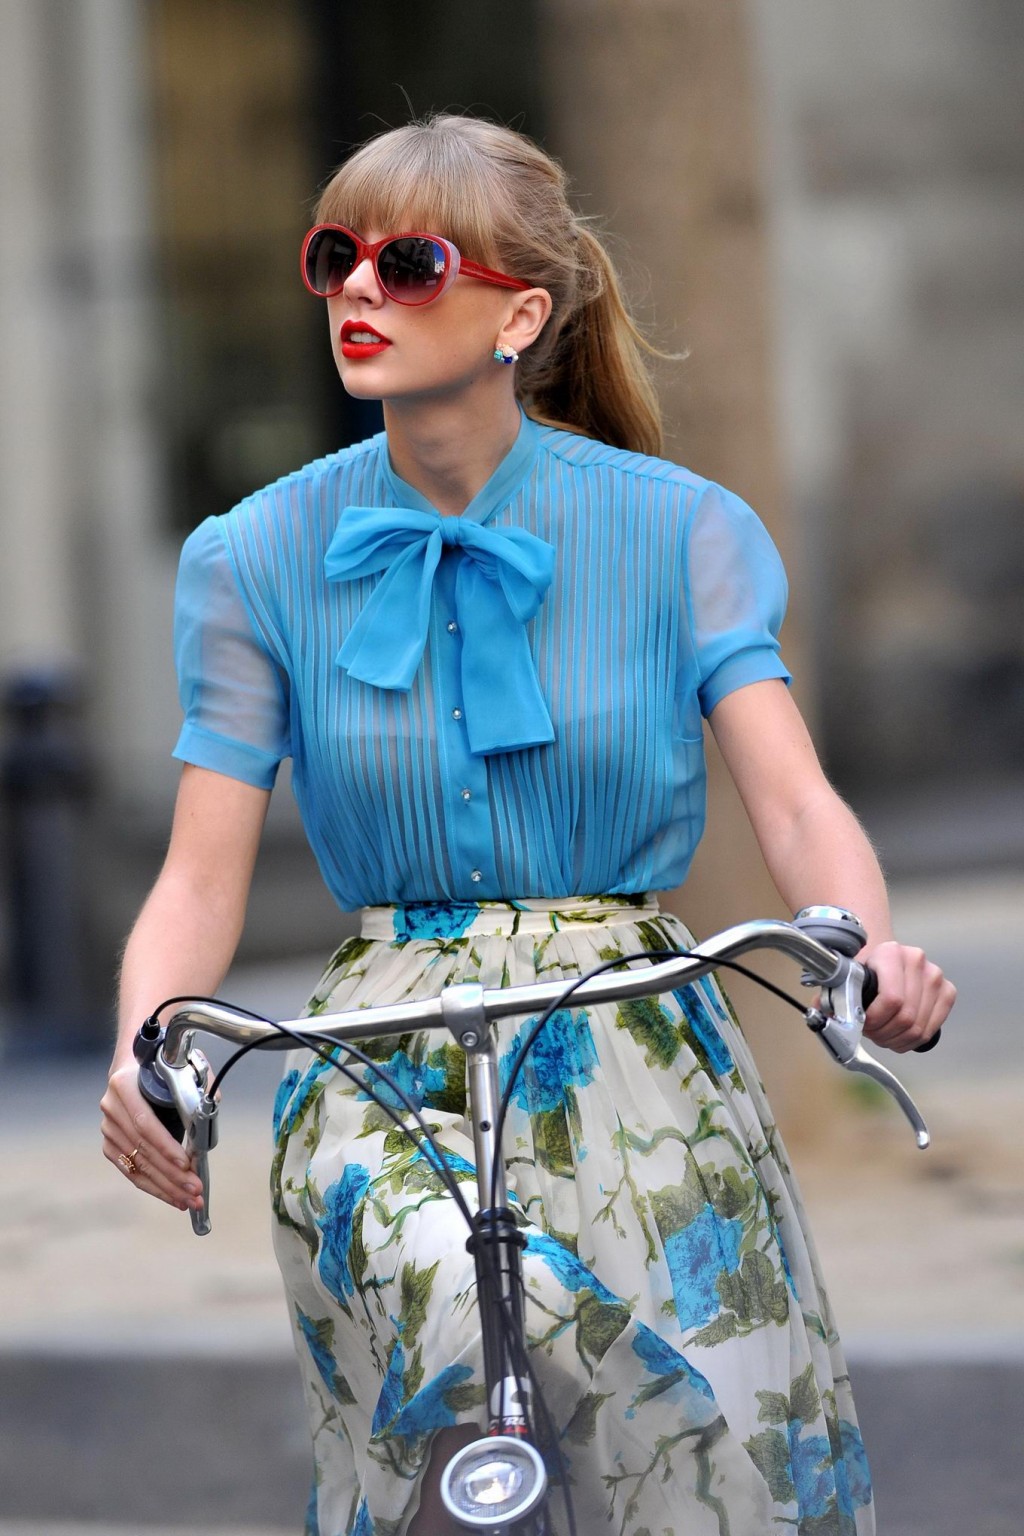 Taylor Swift see through to bra while riding a bike on the music video set #75251535